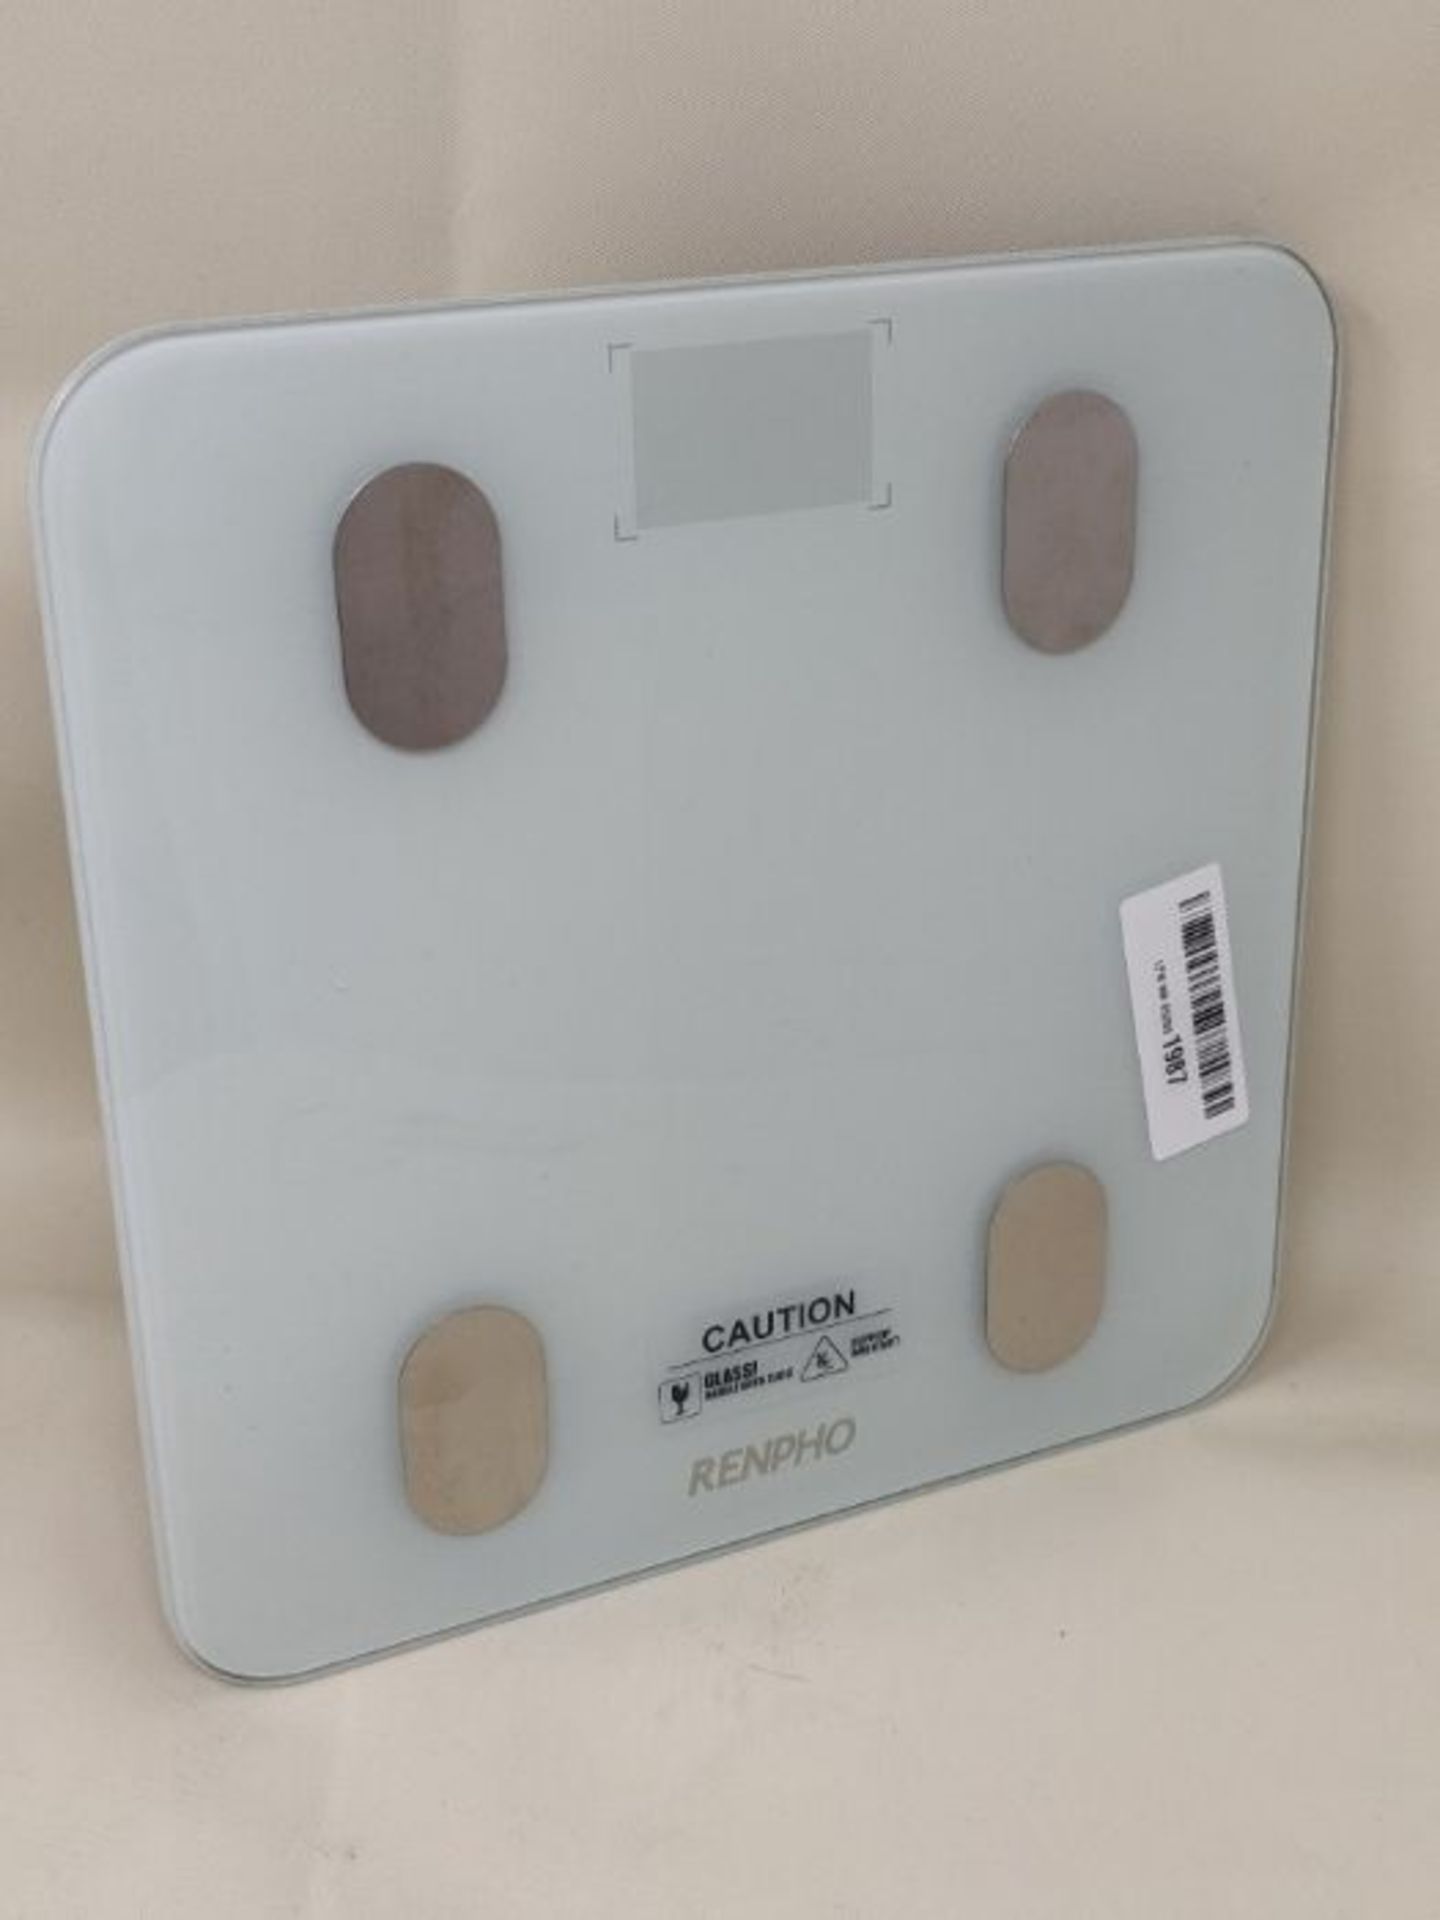 Bluetooth Body Fat Scale, RENPHO Digital Smart Bathroom Weight Scales for Body Composi - Image 2 of 2